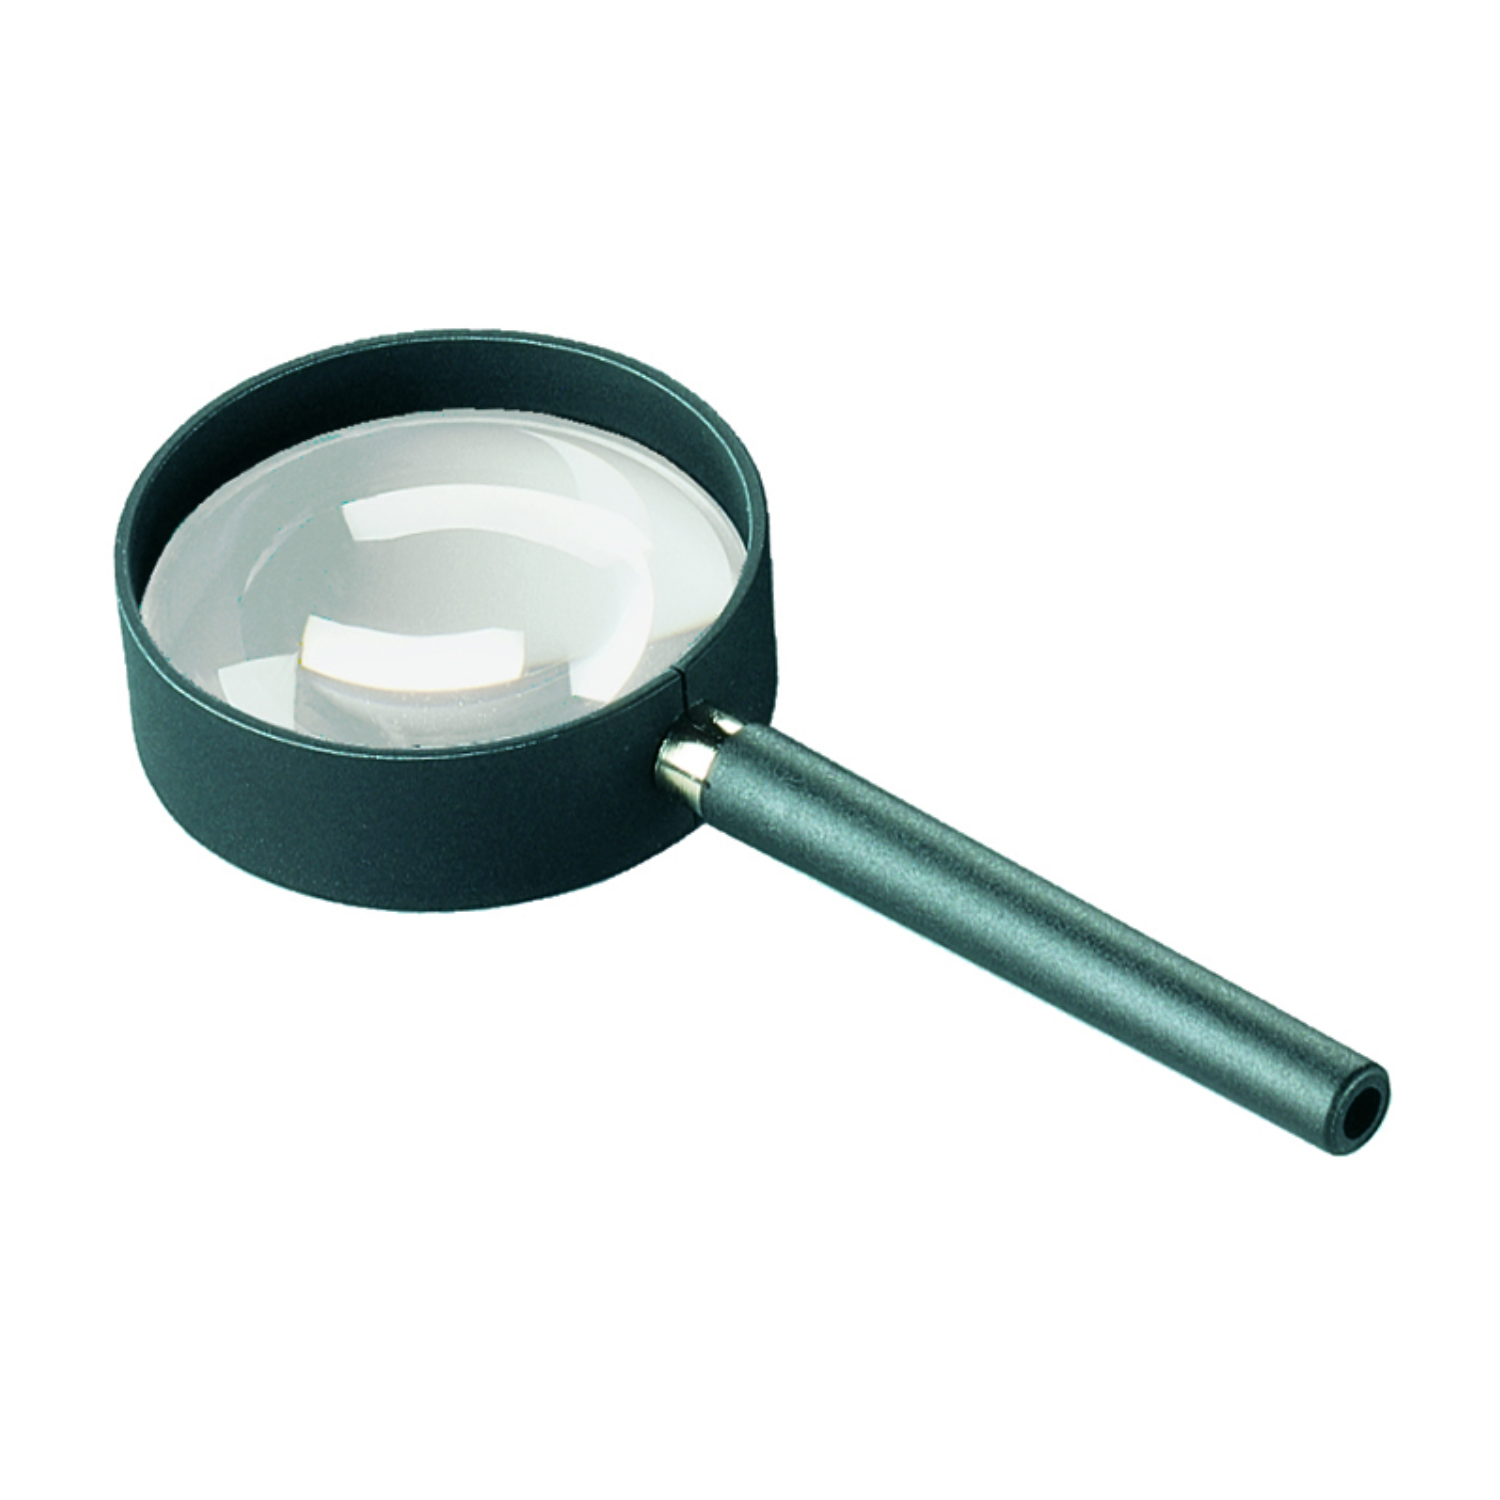 6x Mini Pocket Magnifying Glass Folding Magnifier Loupe With